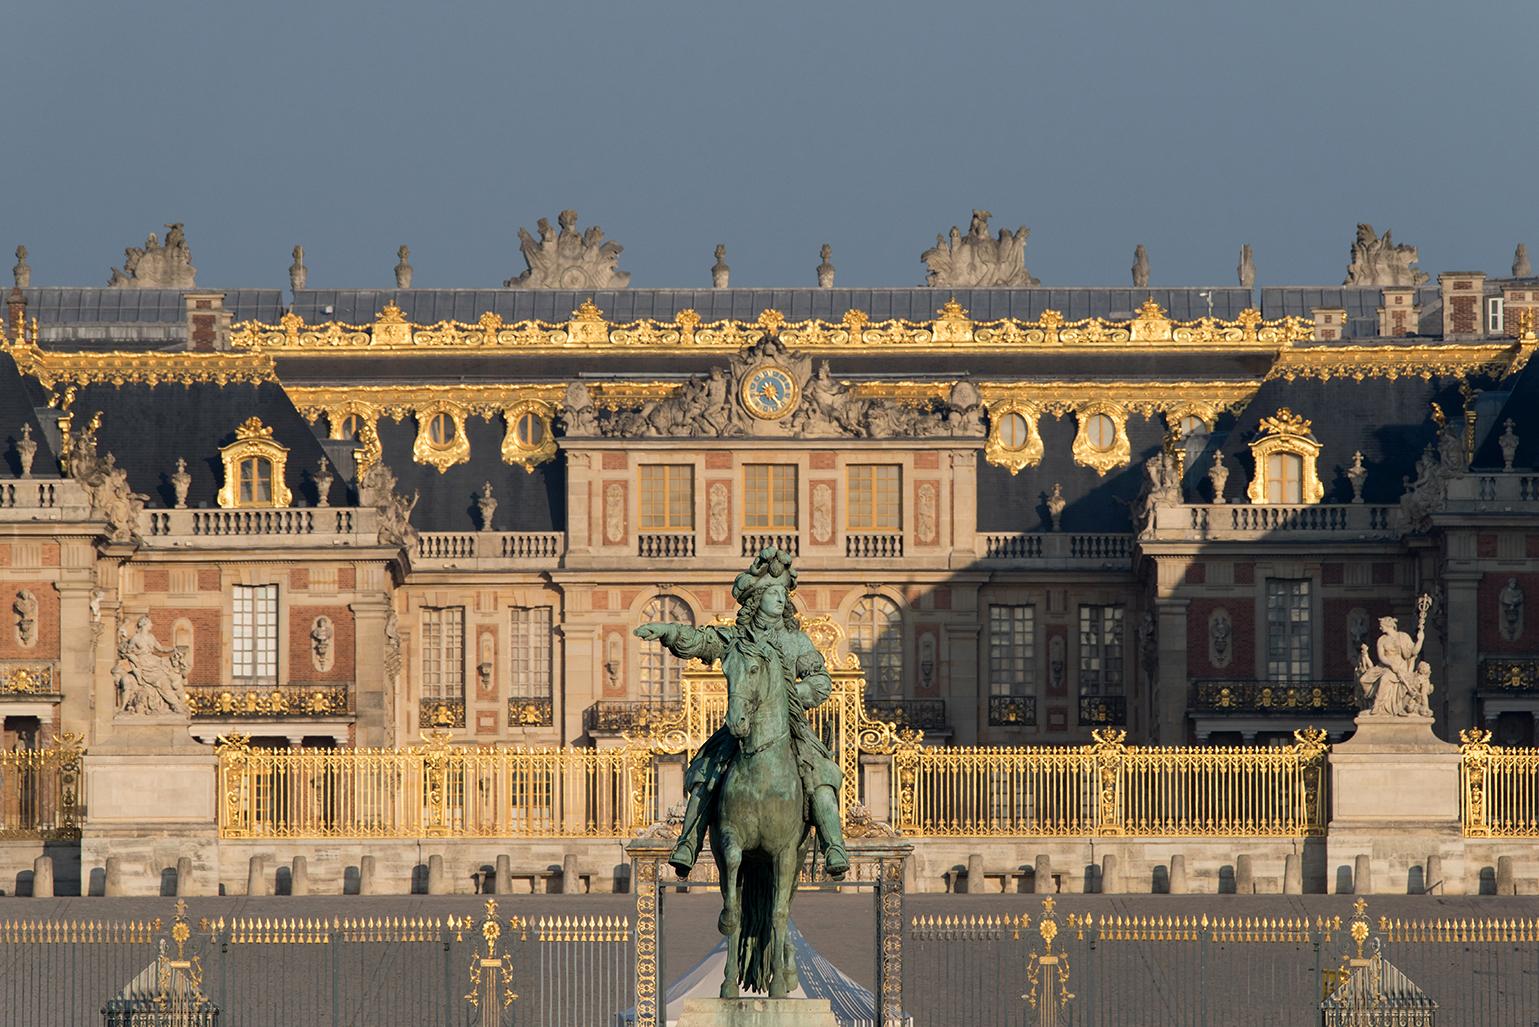 During the Renaissance, the term "château" referred to a luxurious residence in a  rural location—as opposed to an urban palace. Thus, it was common to speak of the Louvre "Palais" in the heart of Paris, and the "Château" of Versailles in the country. – © Thomas Garnier